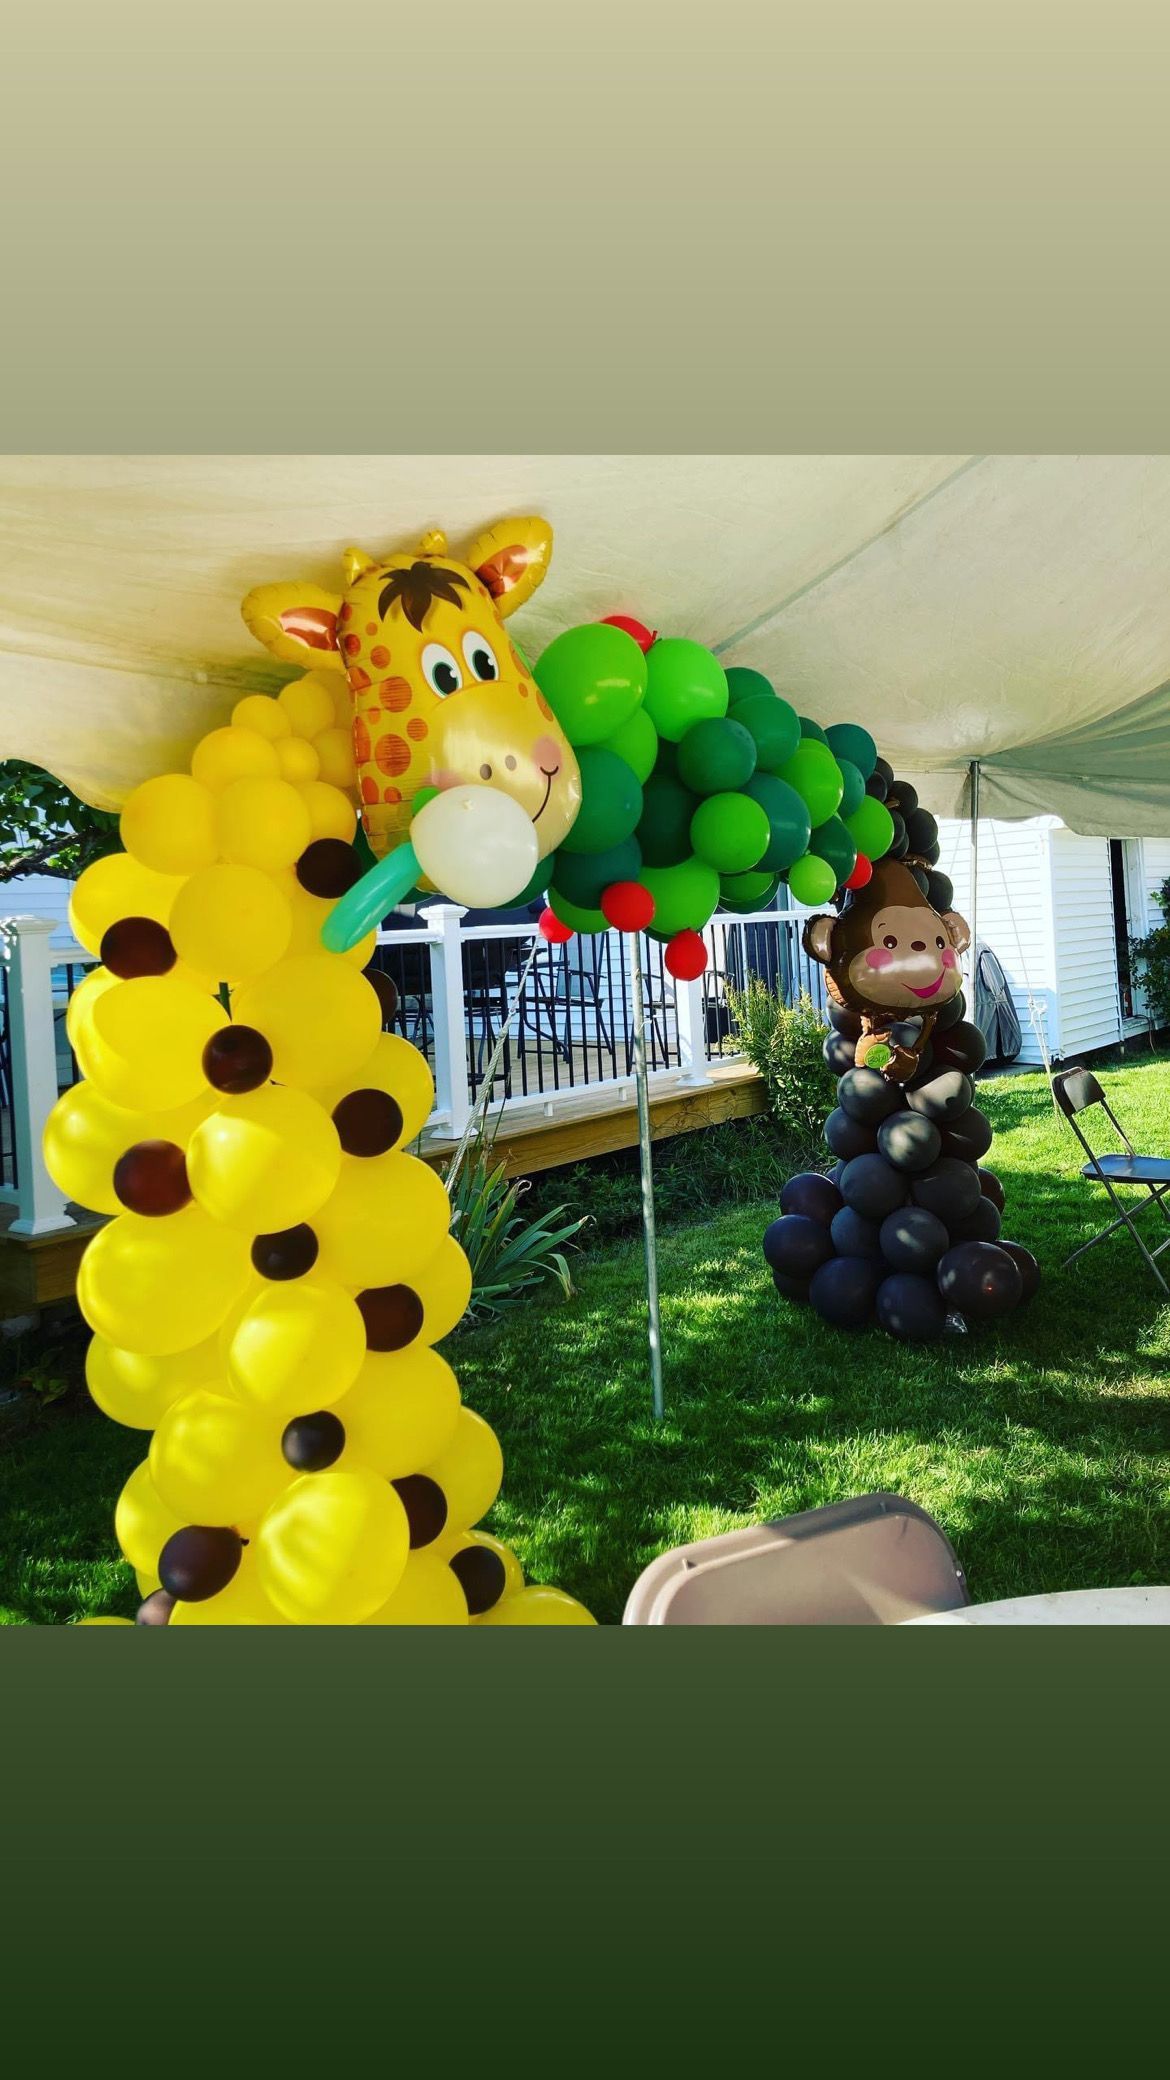 A giraffe and monkey made out of balloons are sitting under a tent.